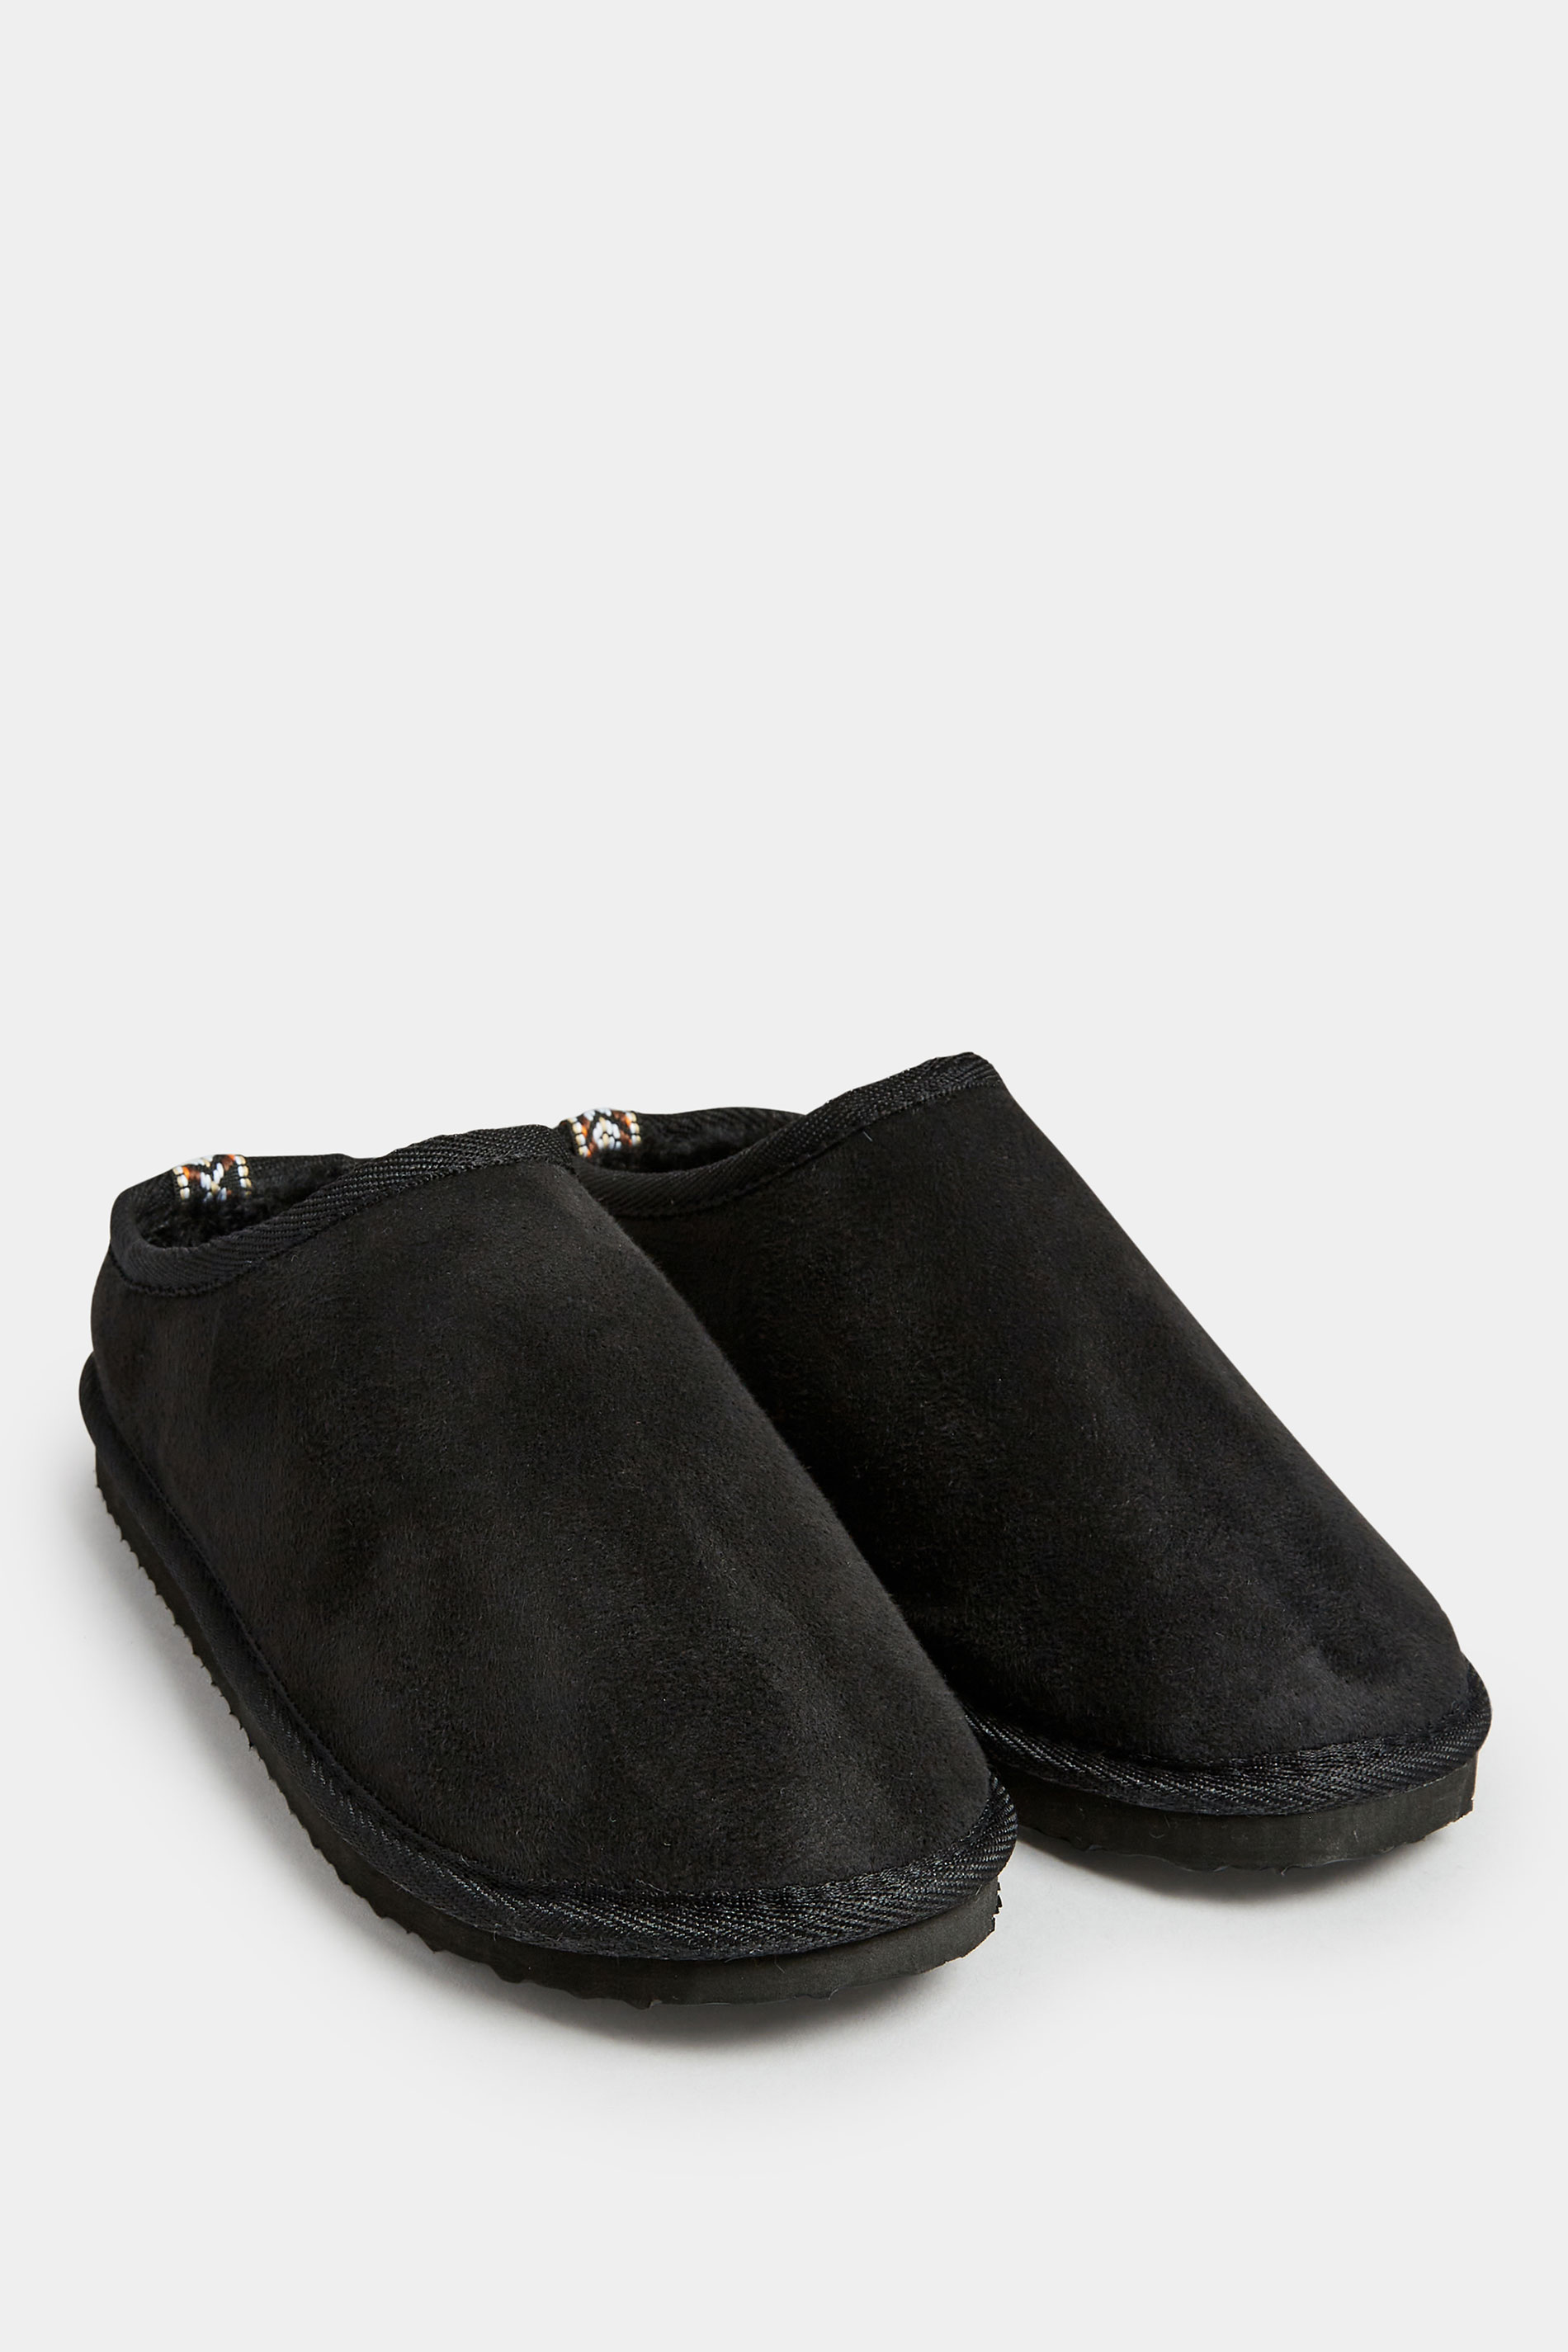 Black Faux Fur Lined Mule Slippers In Wide E Fit | Yours Clothing 2